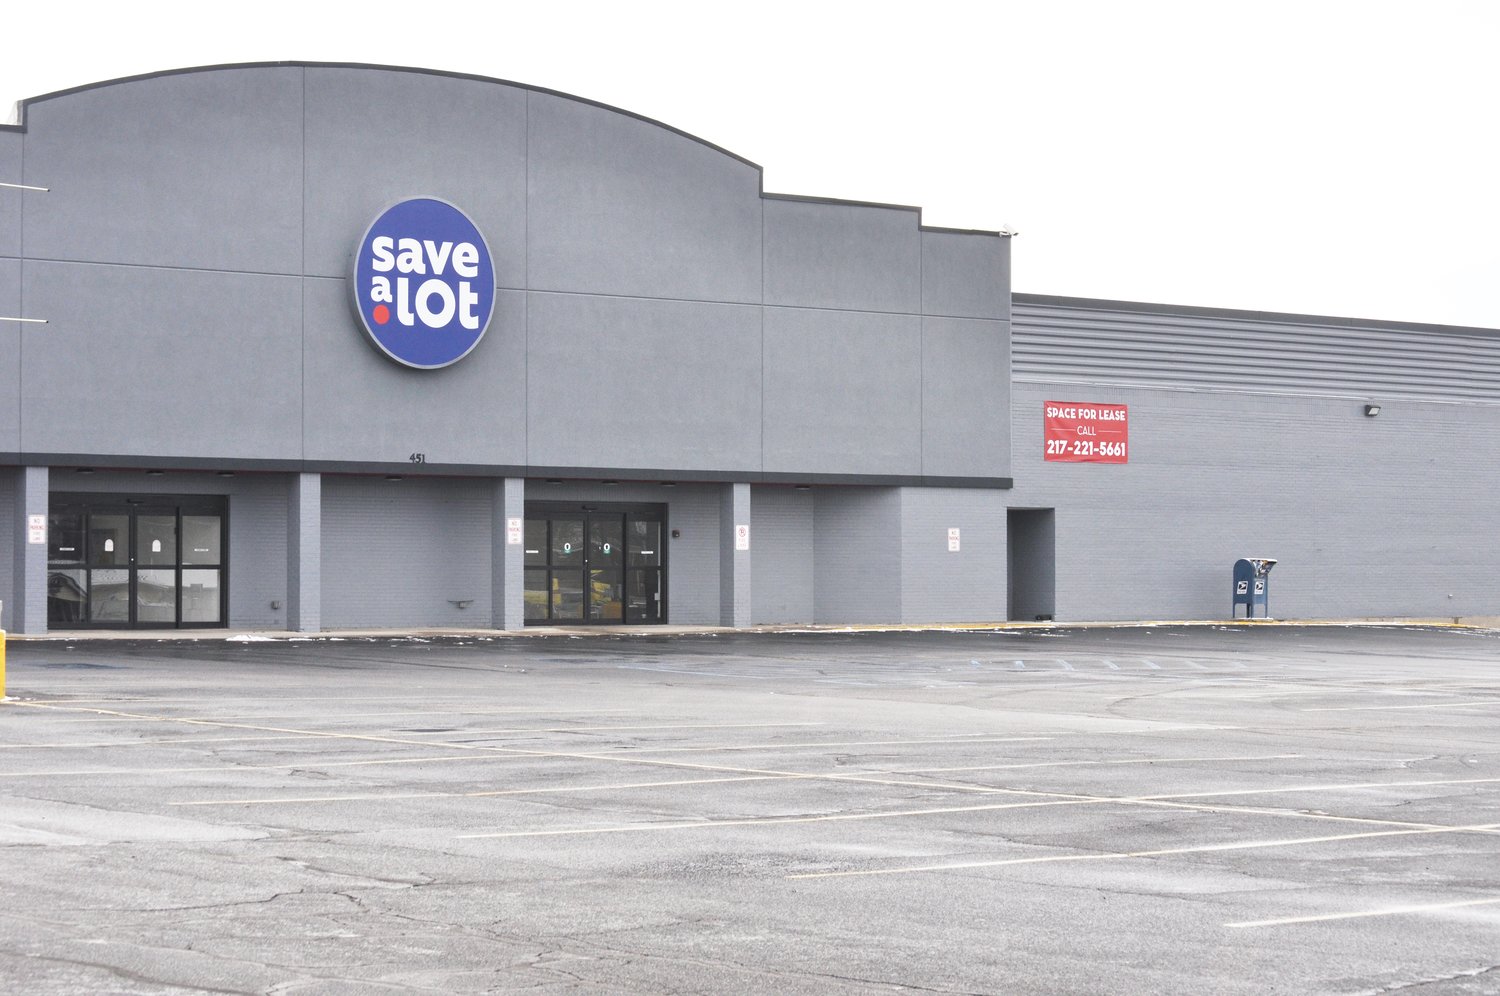 The Montgomery County Health Department is leasing the former Save A Lot building, seen here Thursday, for a community COVID-19 vaccination site.